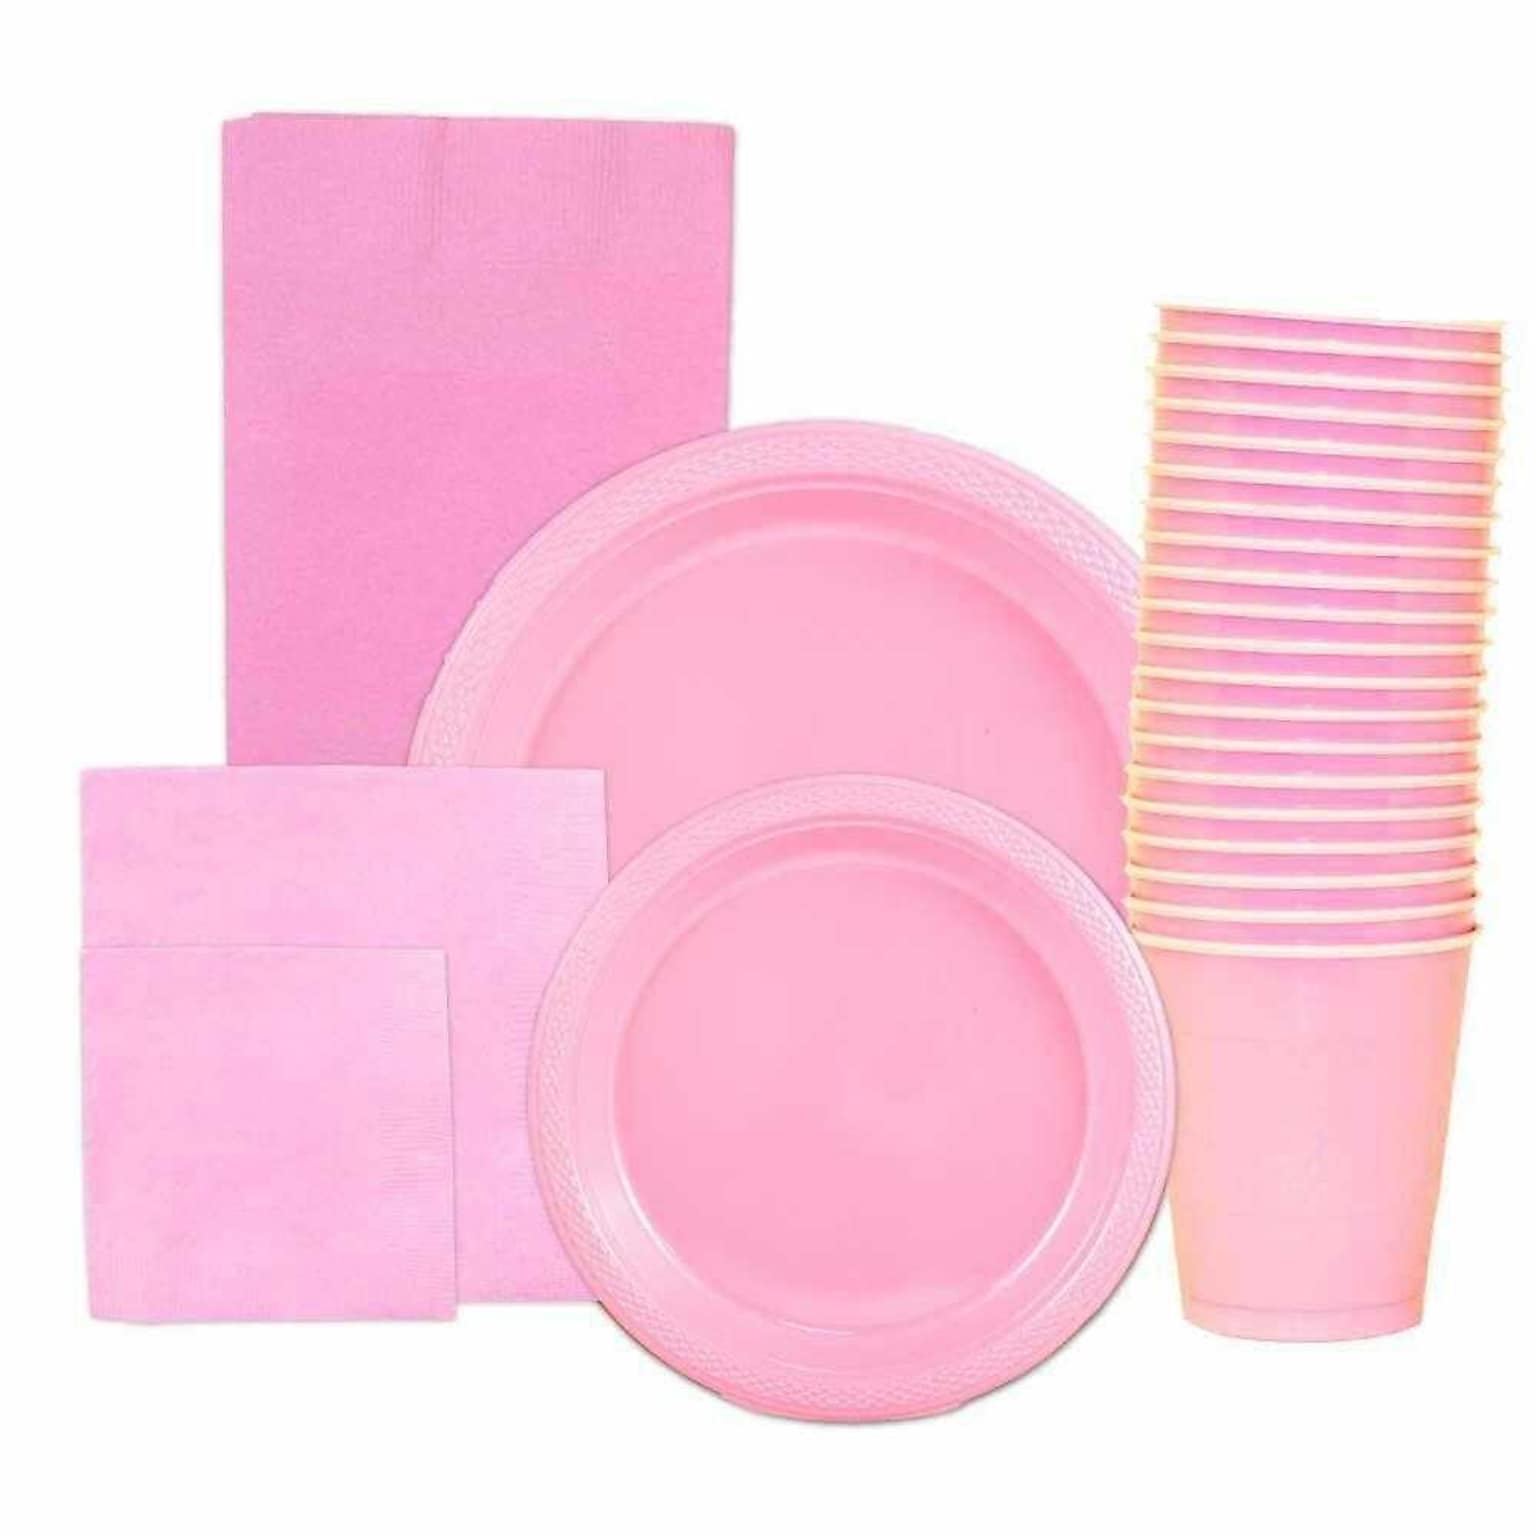 JAM PAPER Party Supply Assortment, Baby Pink Pastel, Plates, Napkins, Cups & Tablecloth, 6/Pack (255PPBBPIS)